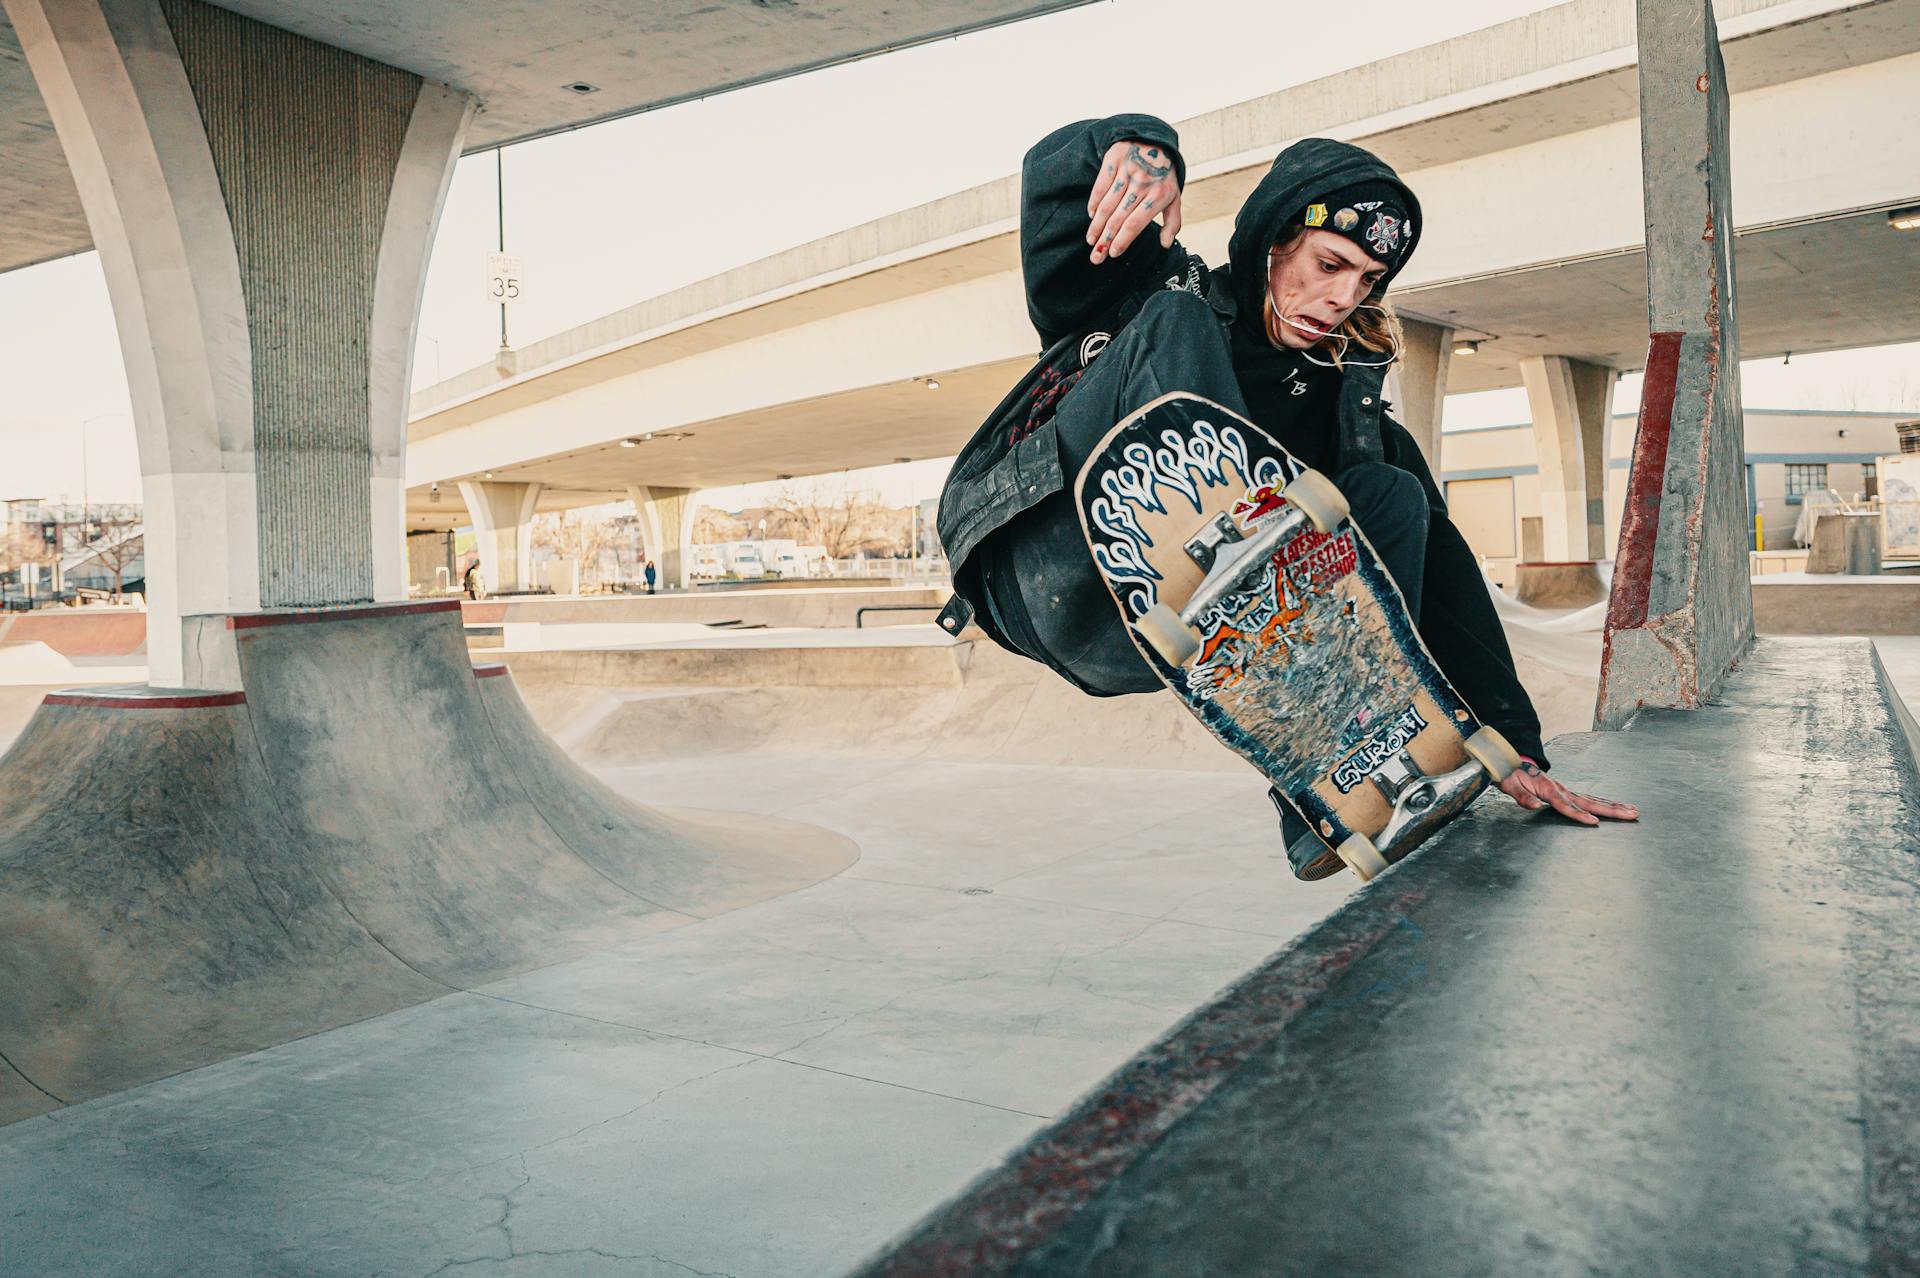 Photo of Man in Black Hoodie Doing a Skateboarding Trick at at Skate Park